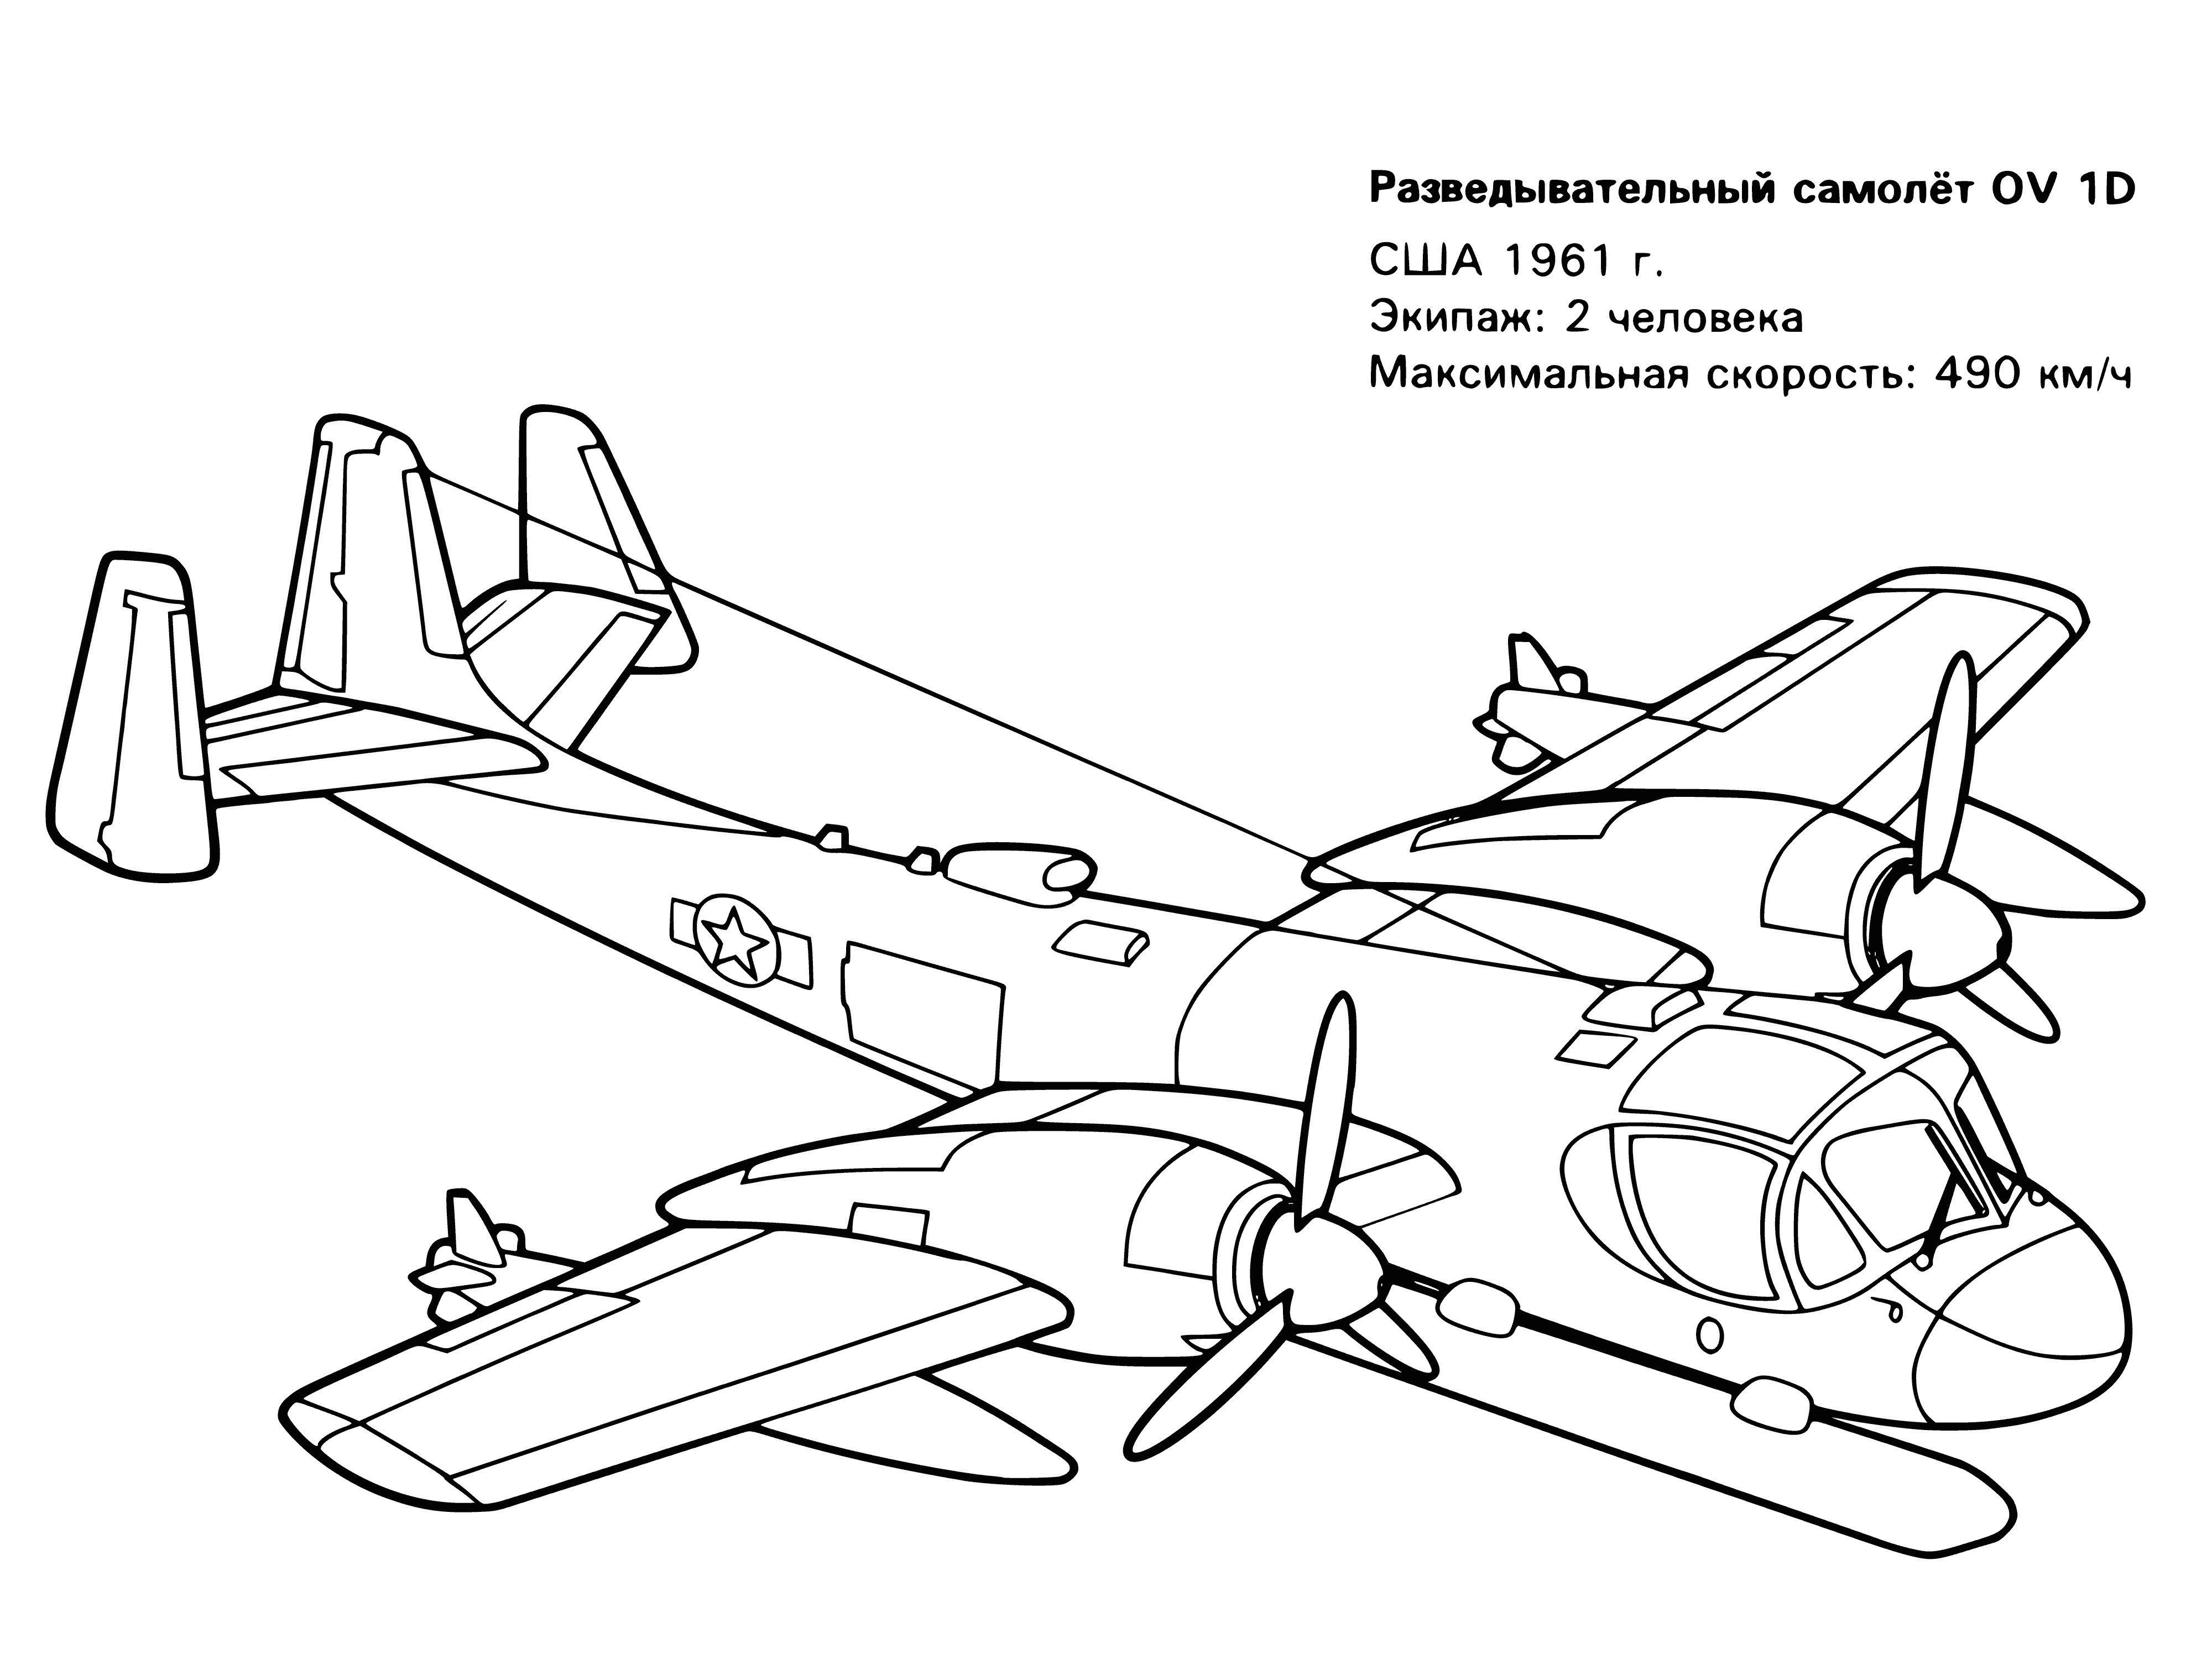 coloring page: 3 aircraft w/ US markings: 1 airplane (camouflage), 1 helicopter (camouflage), and 1 rocket (silver). Engines running on airplane & rocket. 3 people: 2 in airplane & 1 in helicopter.